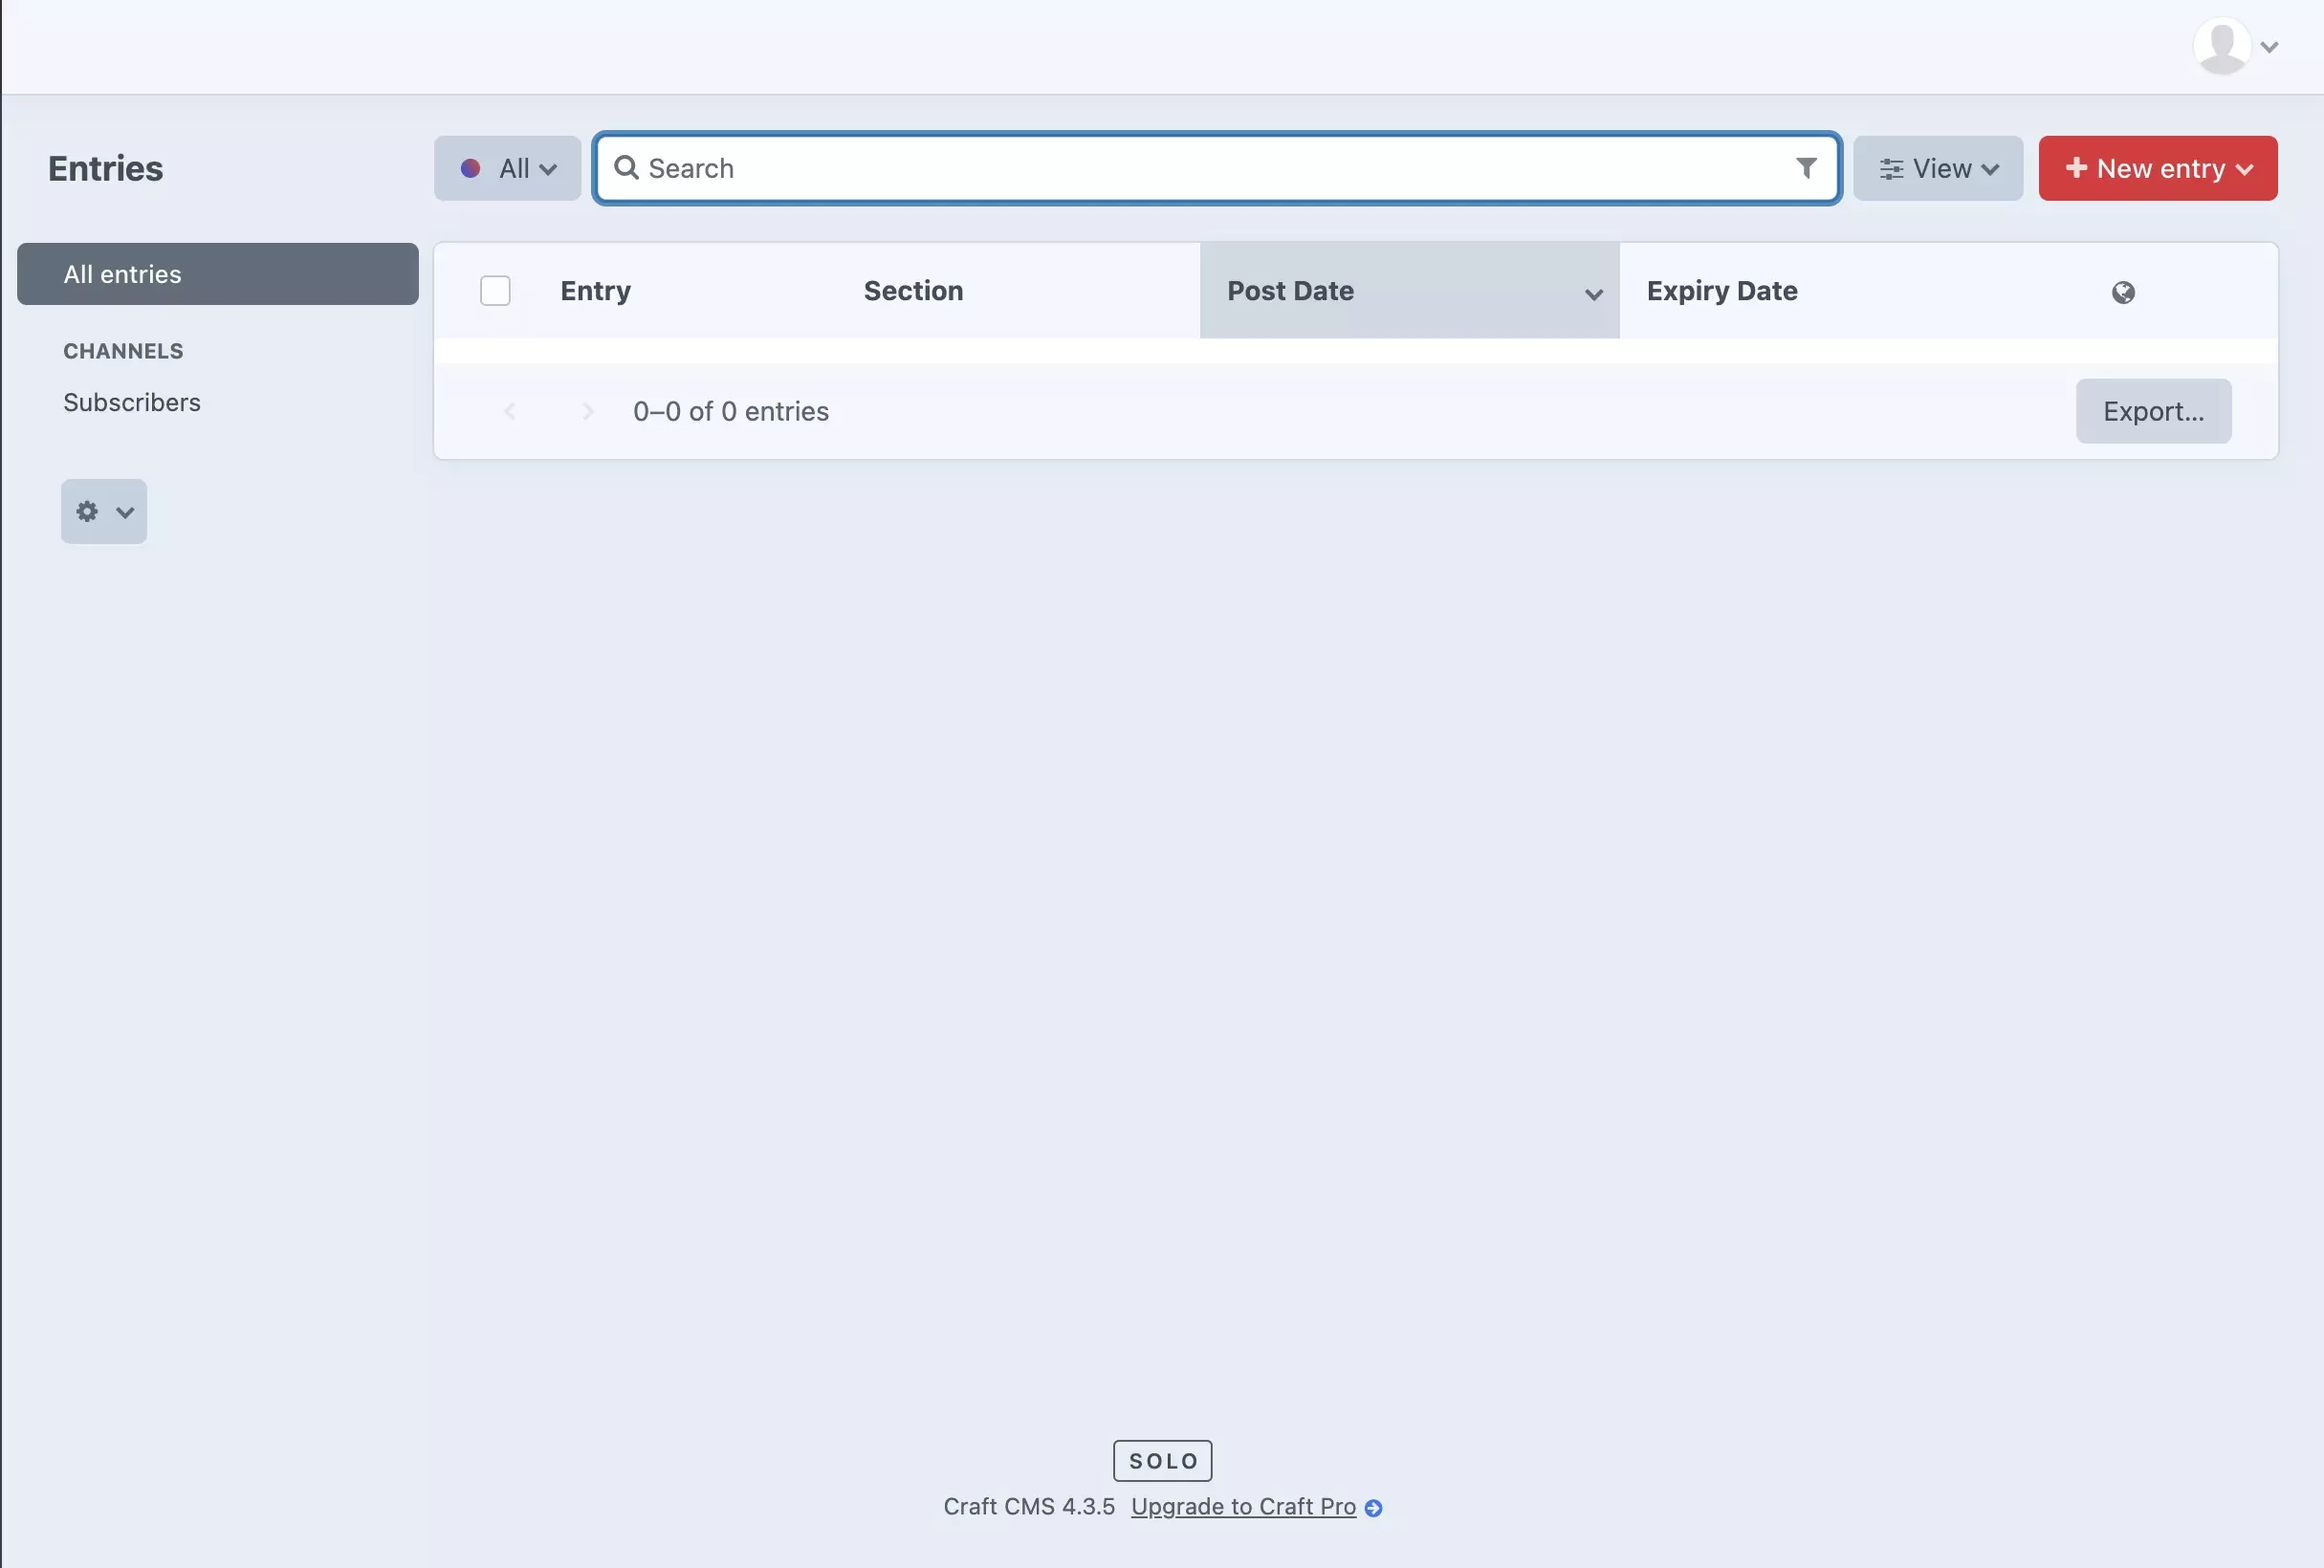 A screenshot of the Craft CMS entries screen with the "Subscribers" channel under the channel label on the left side of the screen.